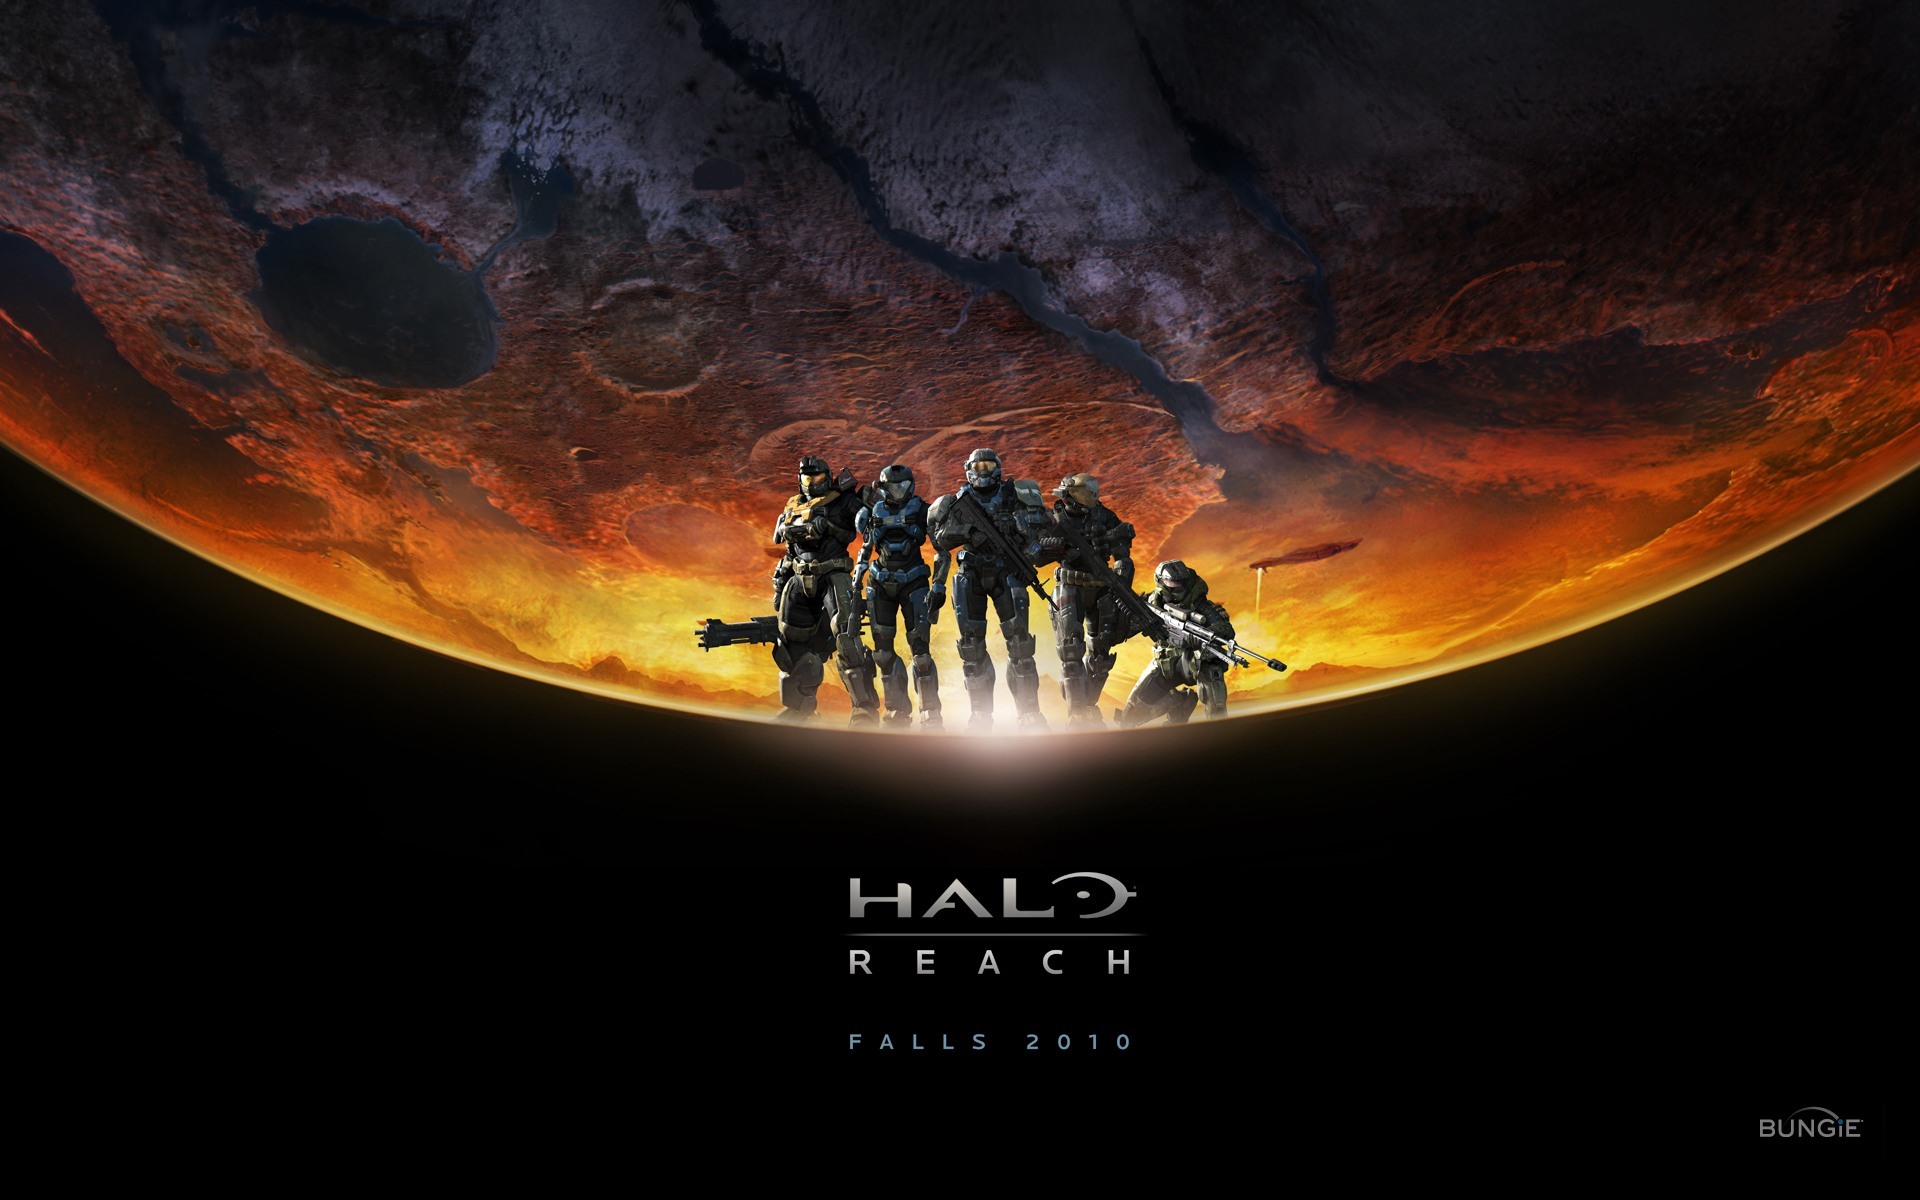 Halo game HD wallpapers #27 - 1920x1200